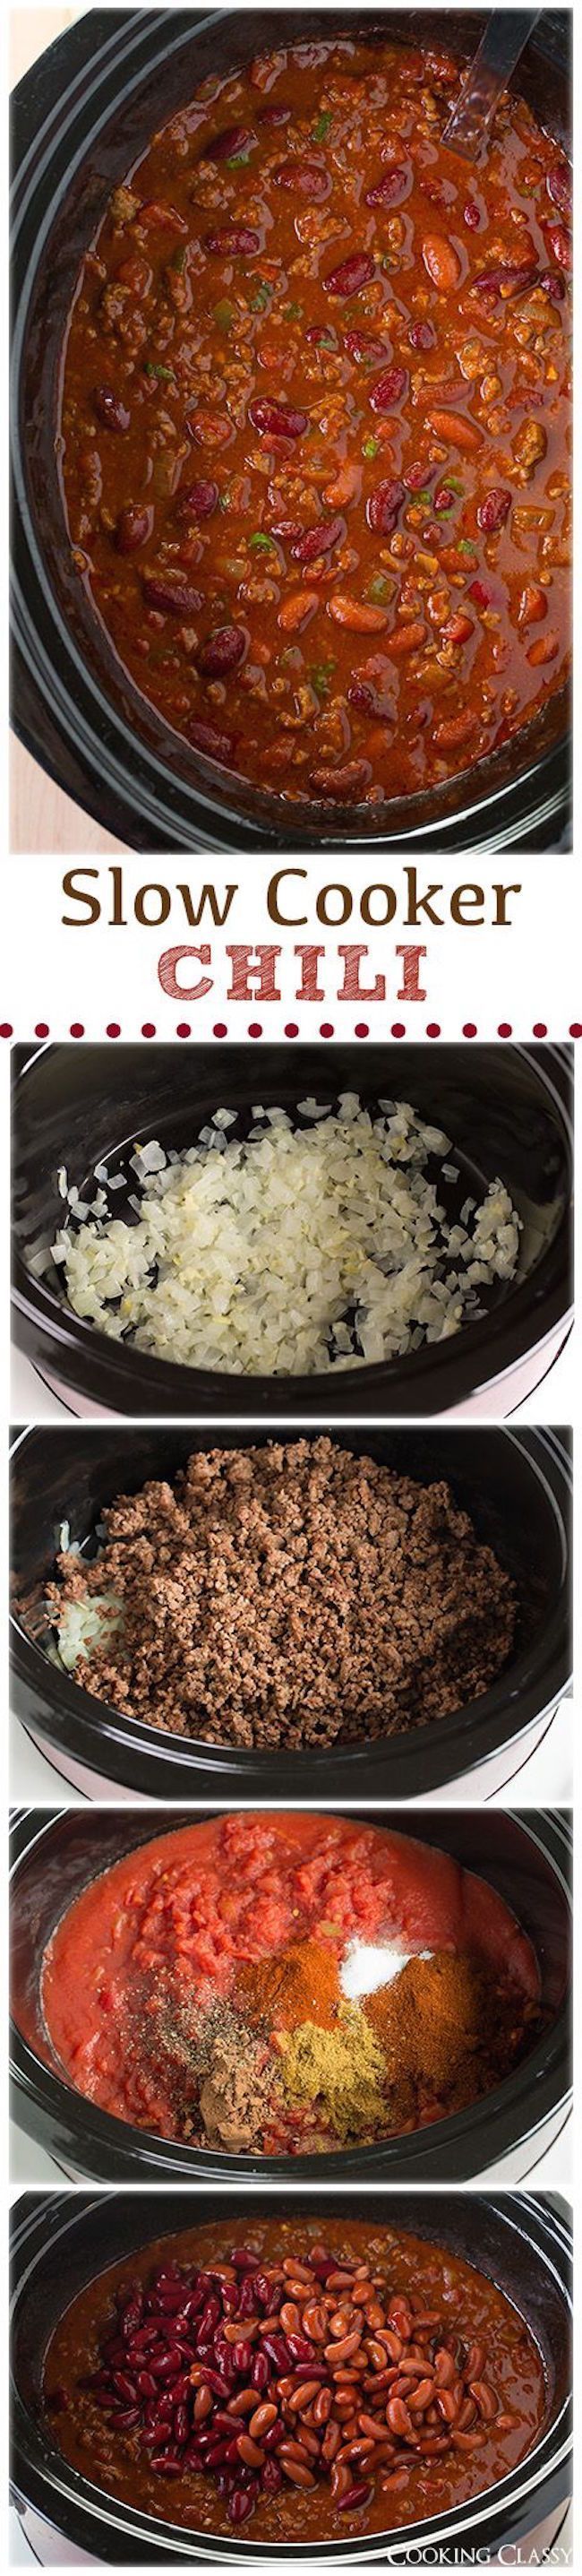 Slow Cooker Chili & other amazing crockpot recipes!